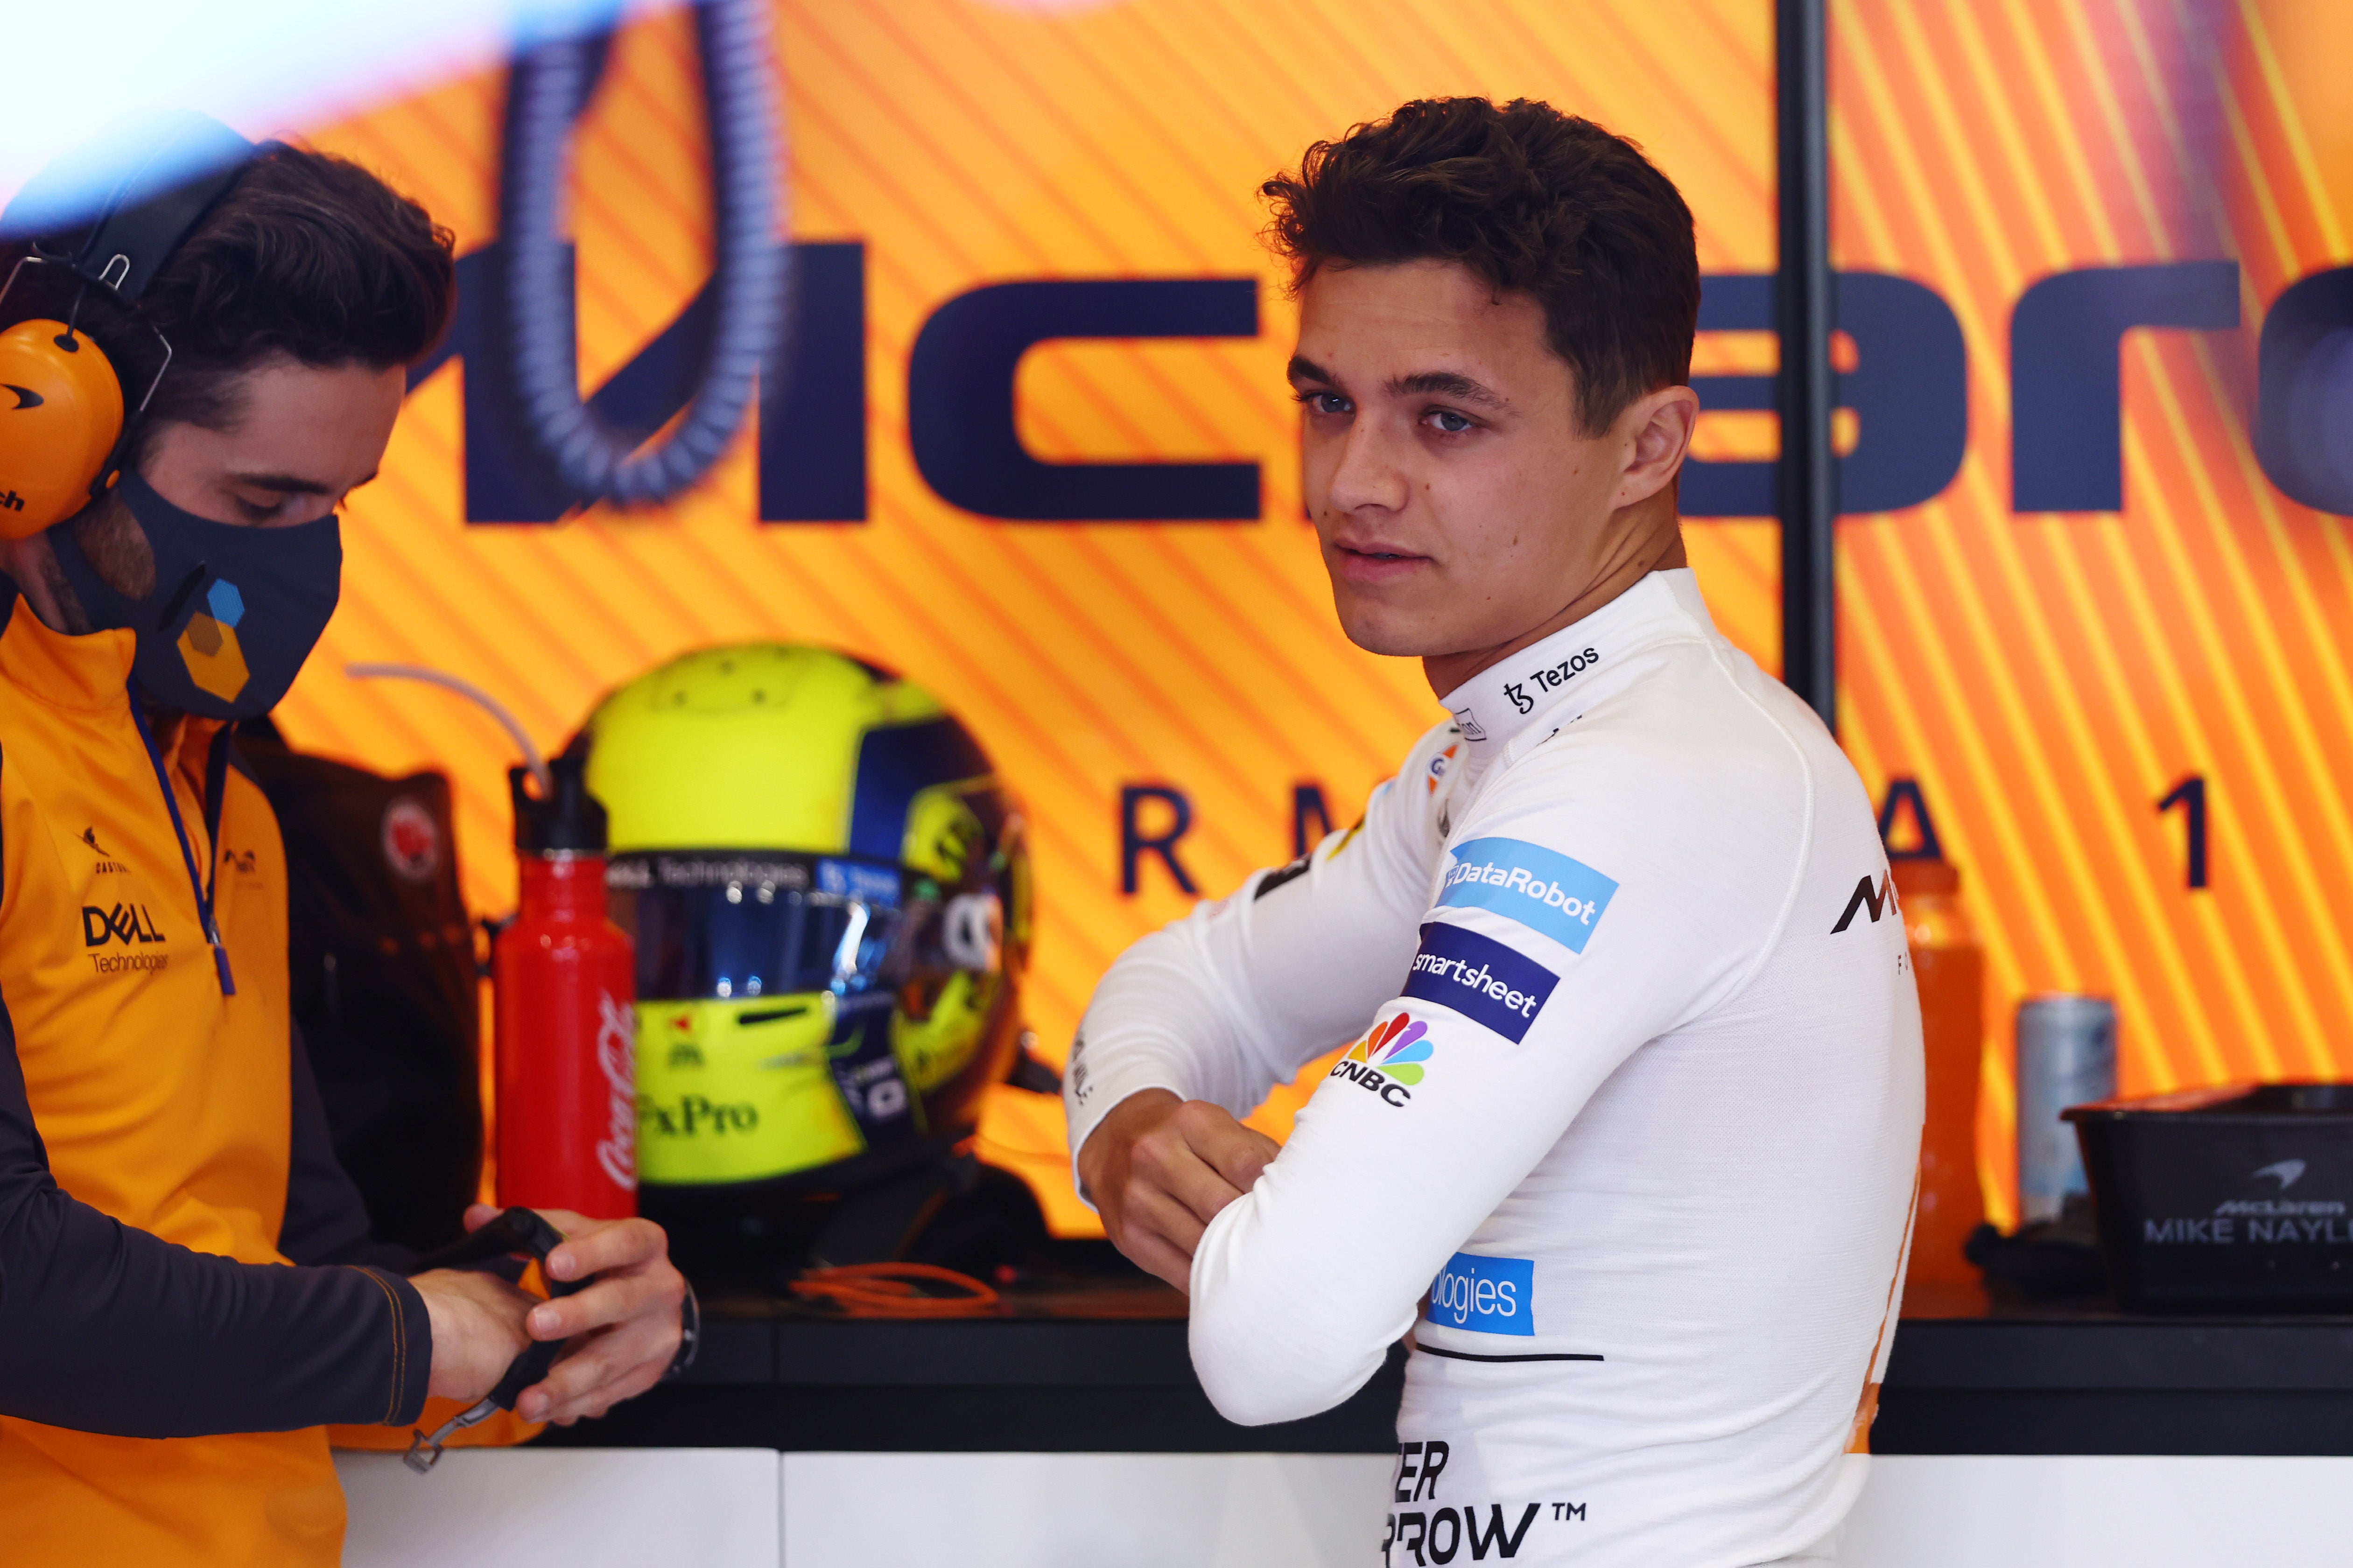 Lando Norris signed a contract extension to 2025 in February